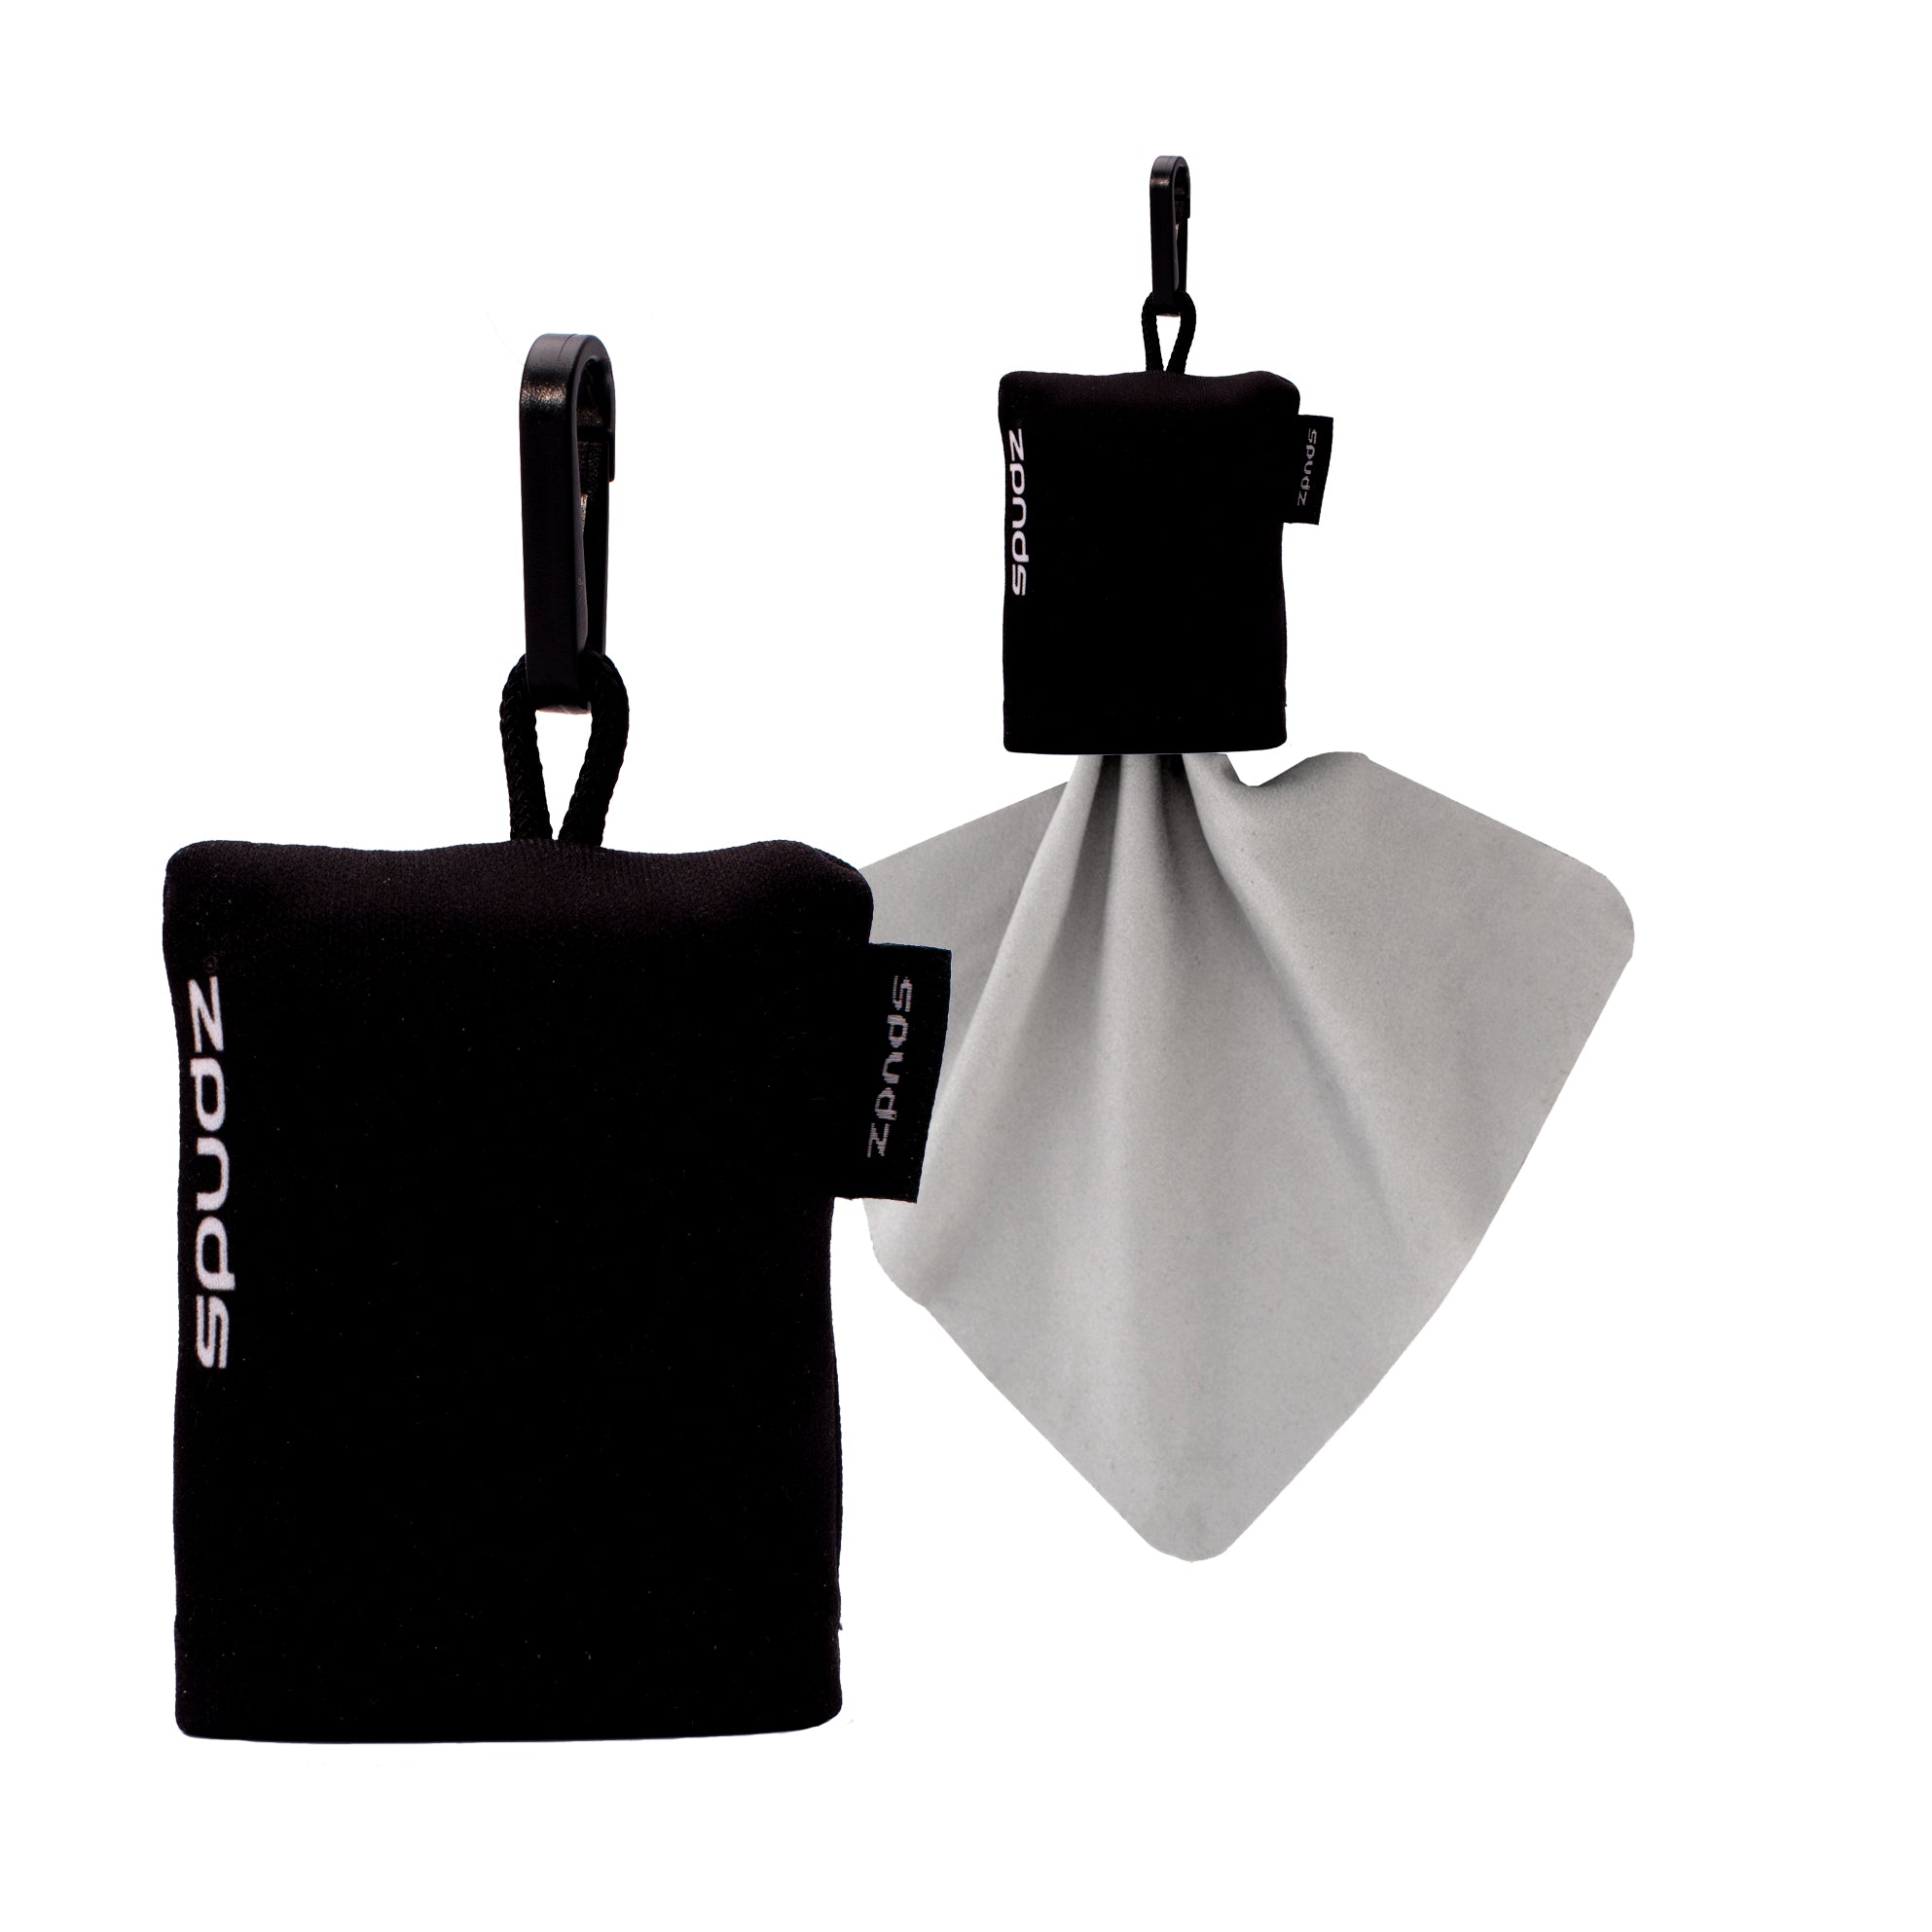 10 x 10 Classic Lens Cloth In Pouch (Black)